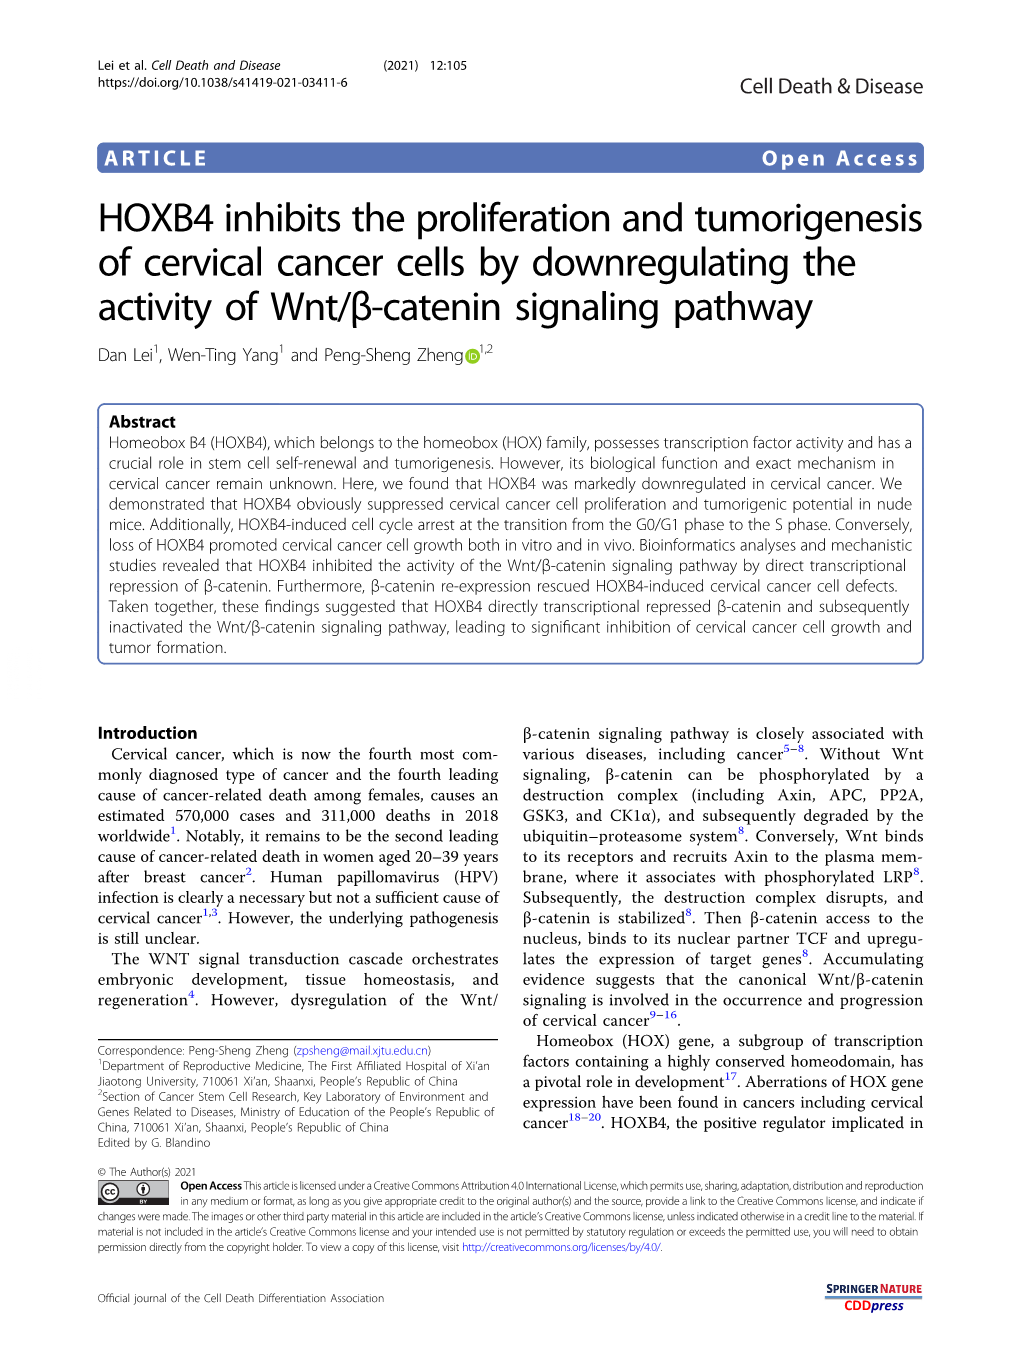 HOXB4 Inhibits the Proliferation and Tumorigenesis of Cervical Cancer